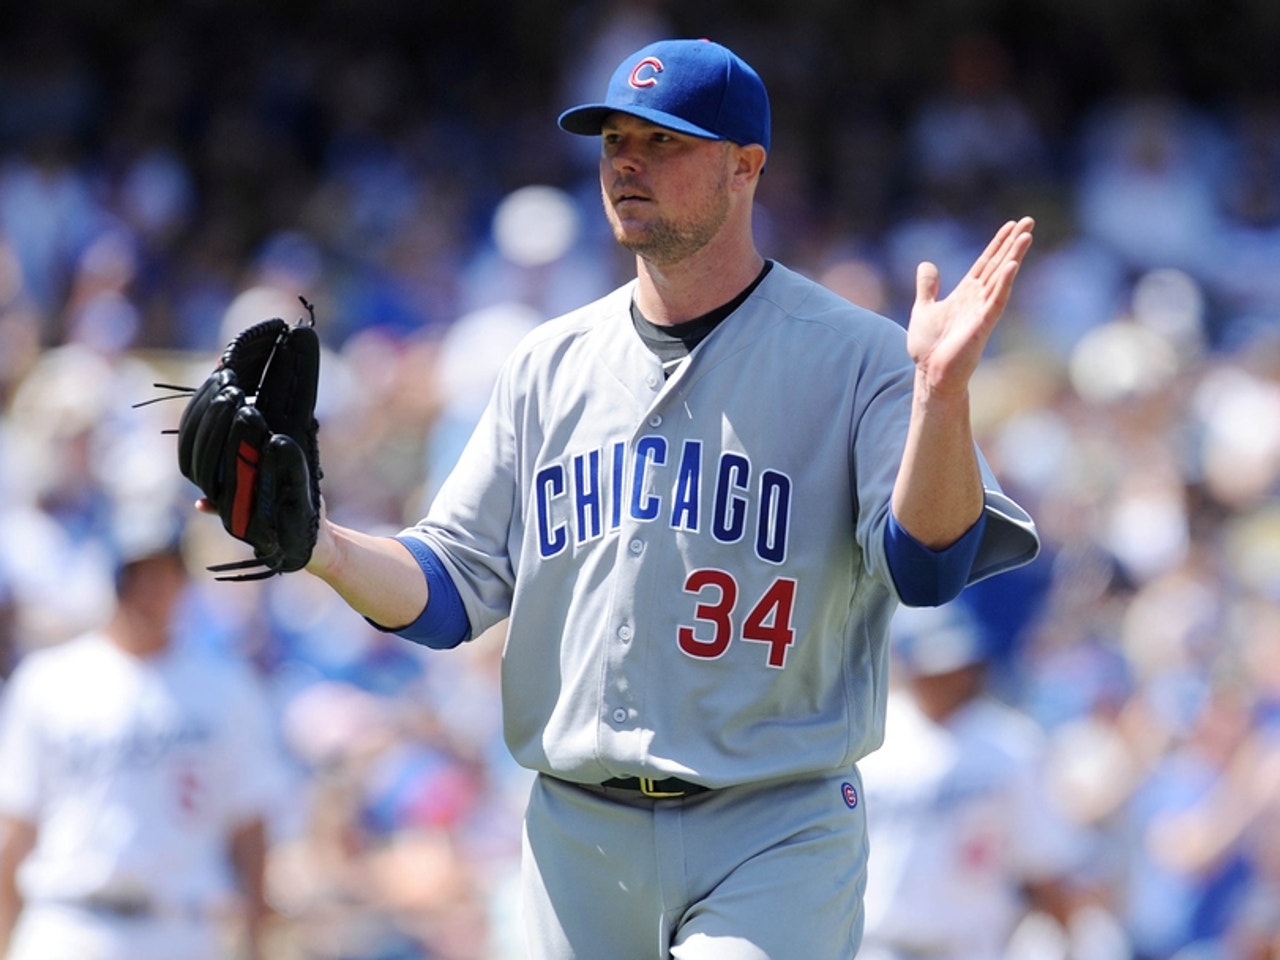 Dempster pitches Cubs past Oakland A's